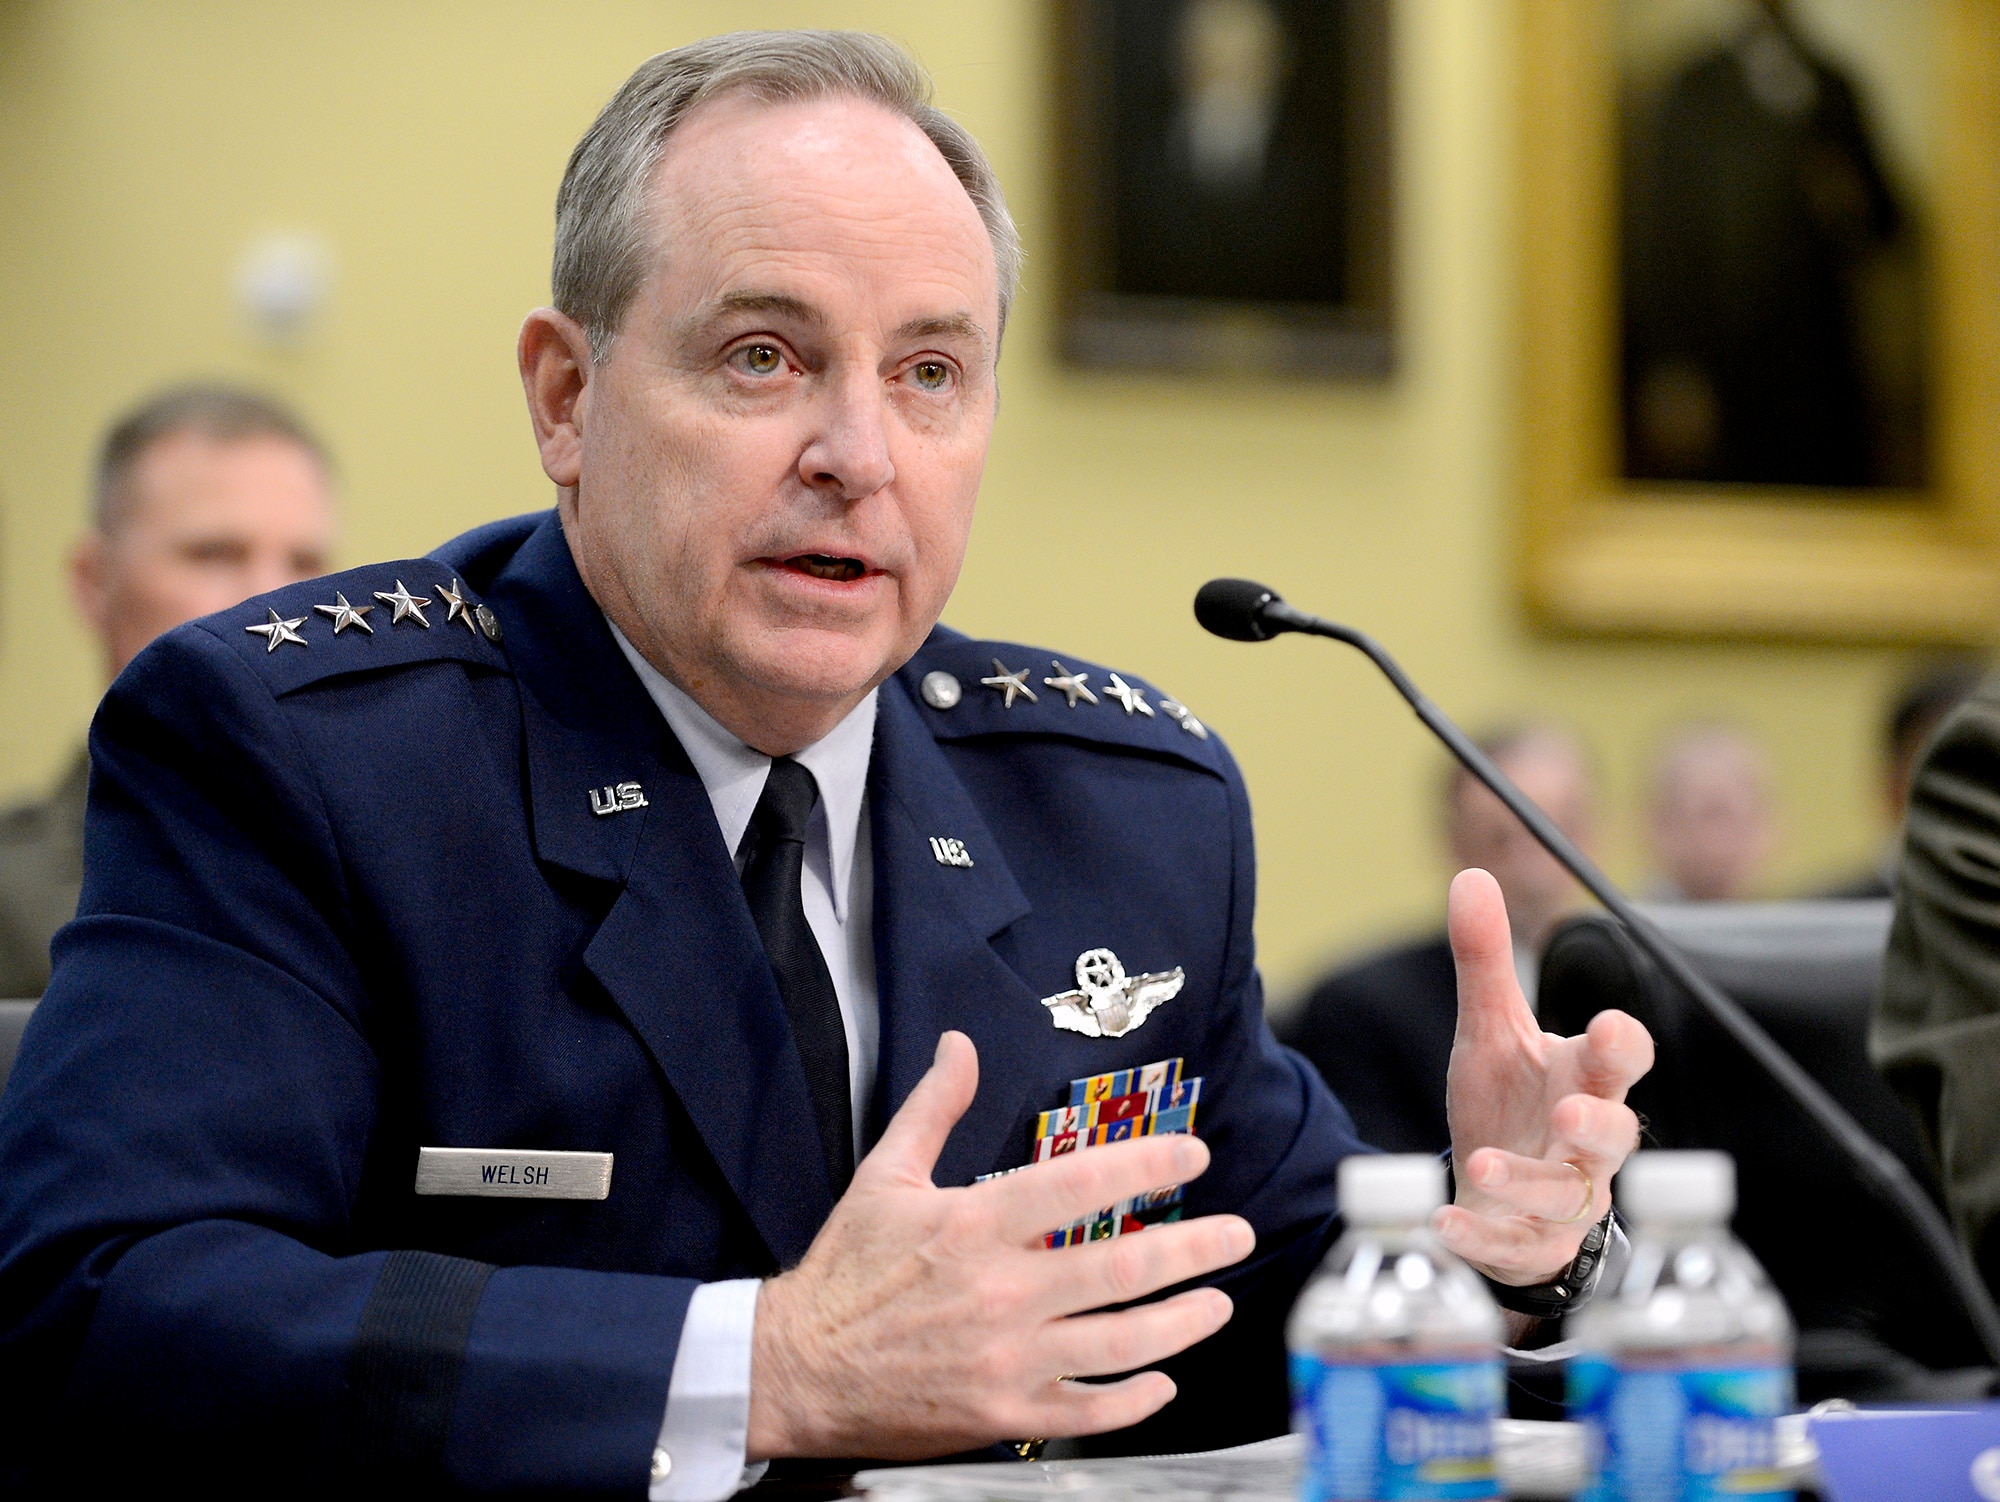 Air Force Chief of Staff Gen. Mark A. Welsh III testifies before the House Appropriations Committee's Military Construction and Veterans Affairs Subcommittee, March 5, 2013, in Washington, D.C.  (U.S. Air Force photo/Scott M. Ash)